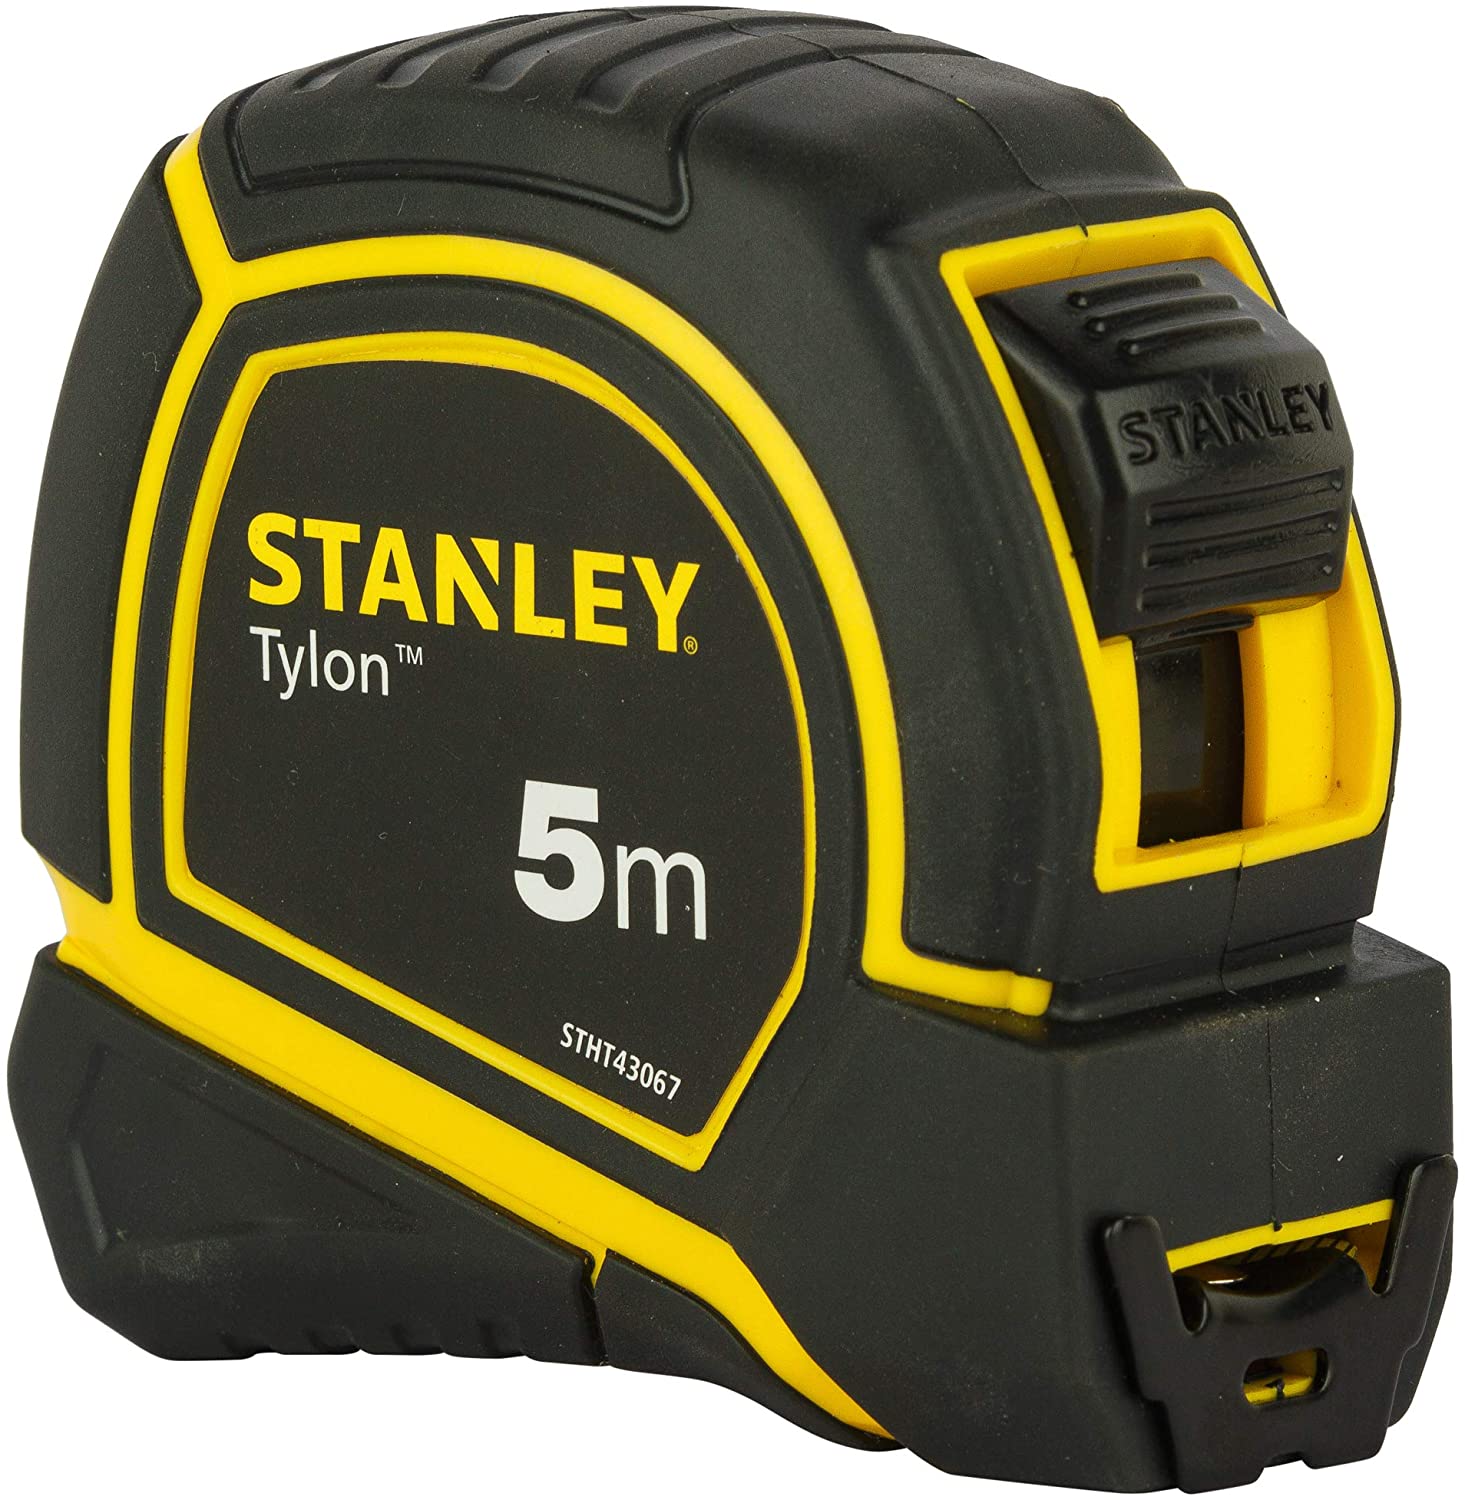 STANLEY STHT43067-12 Tylon 5 Meters Measurement Tape in Rugged Rubber Case